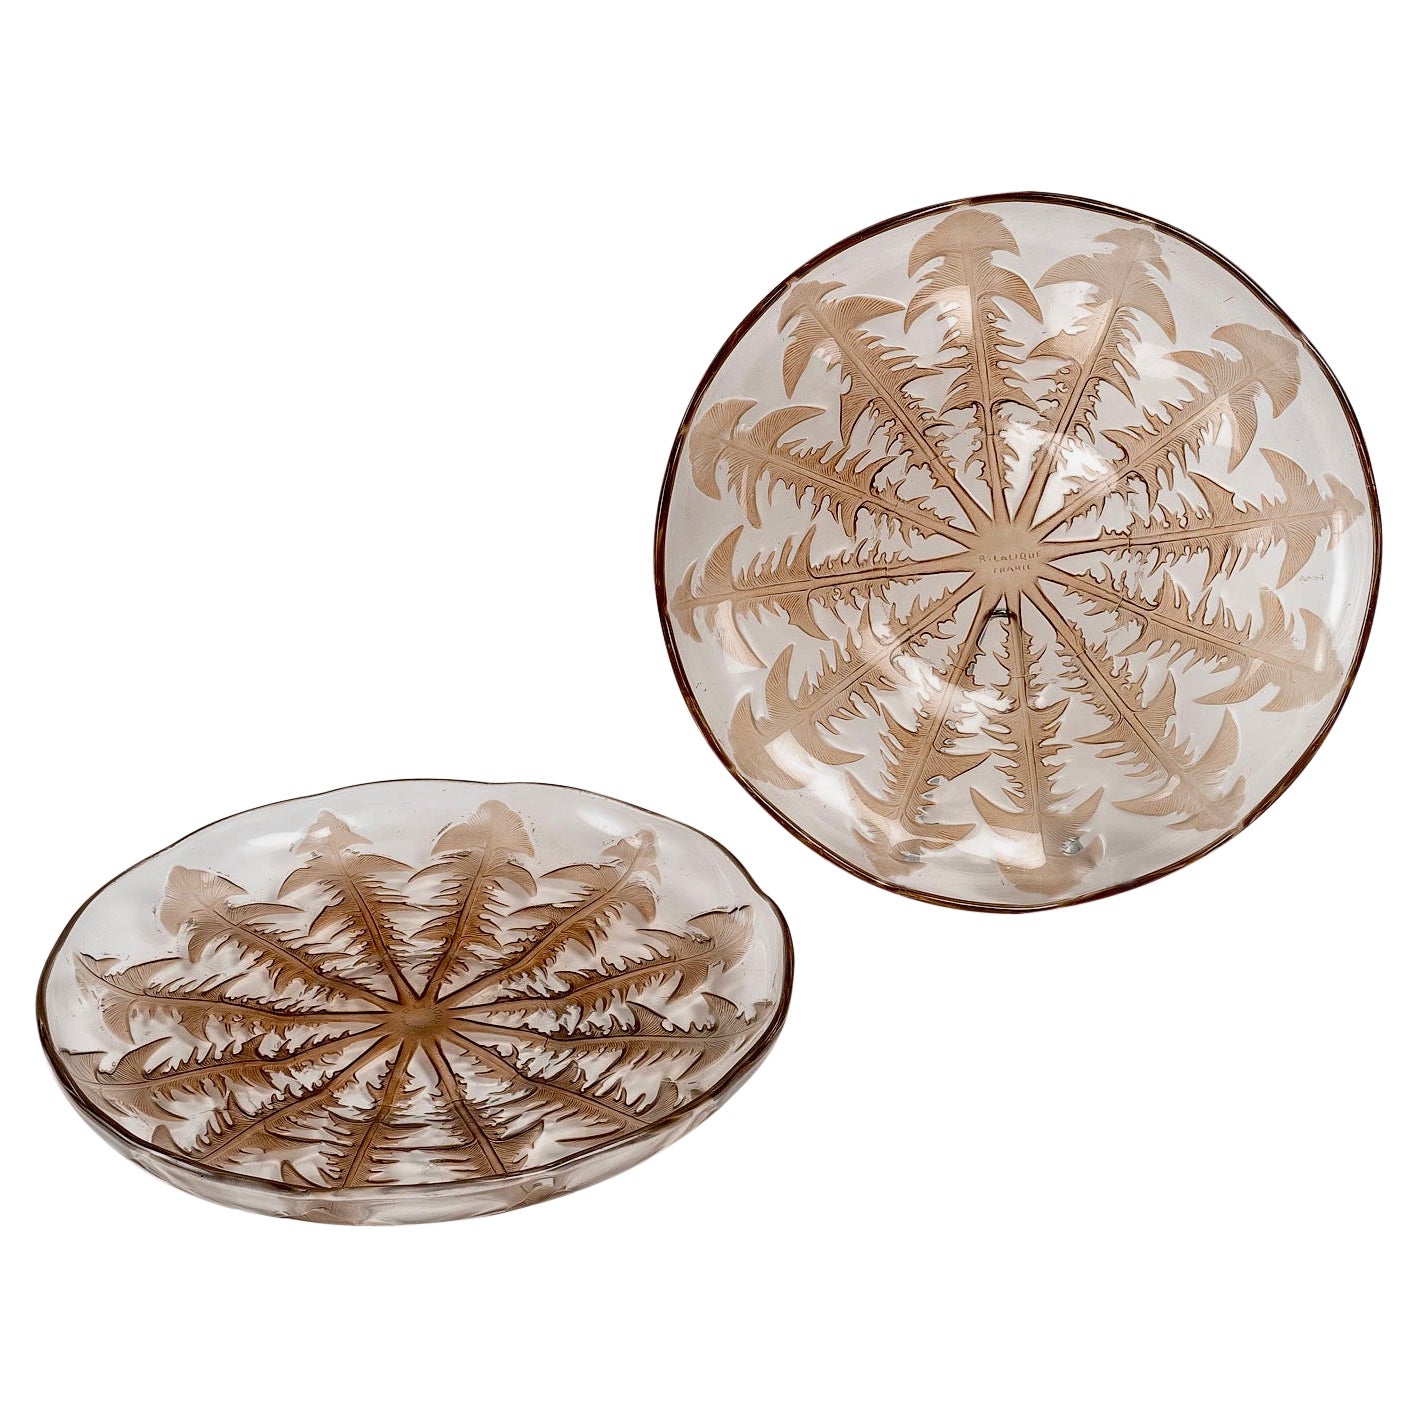 1921 René Lalique, Pair of Plates Dishes Pissenlit Glass with Sepia Patina